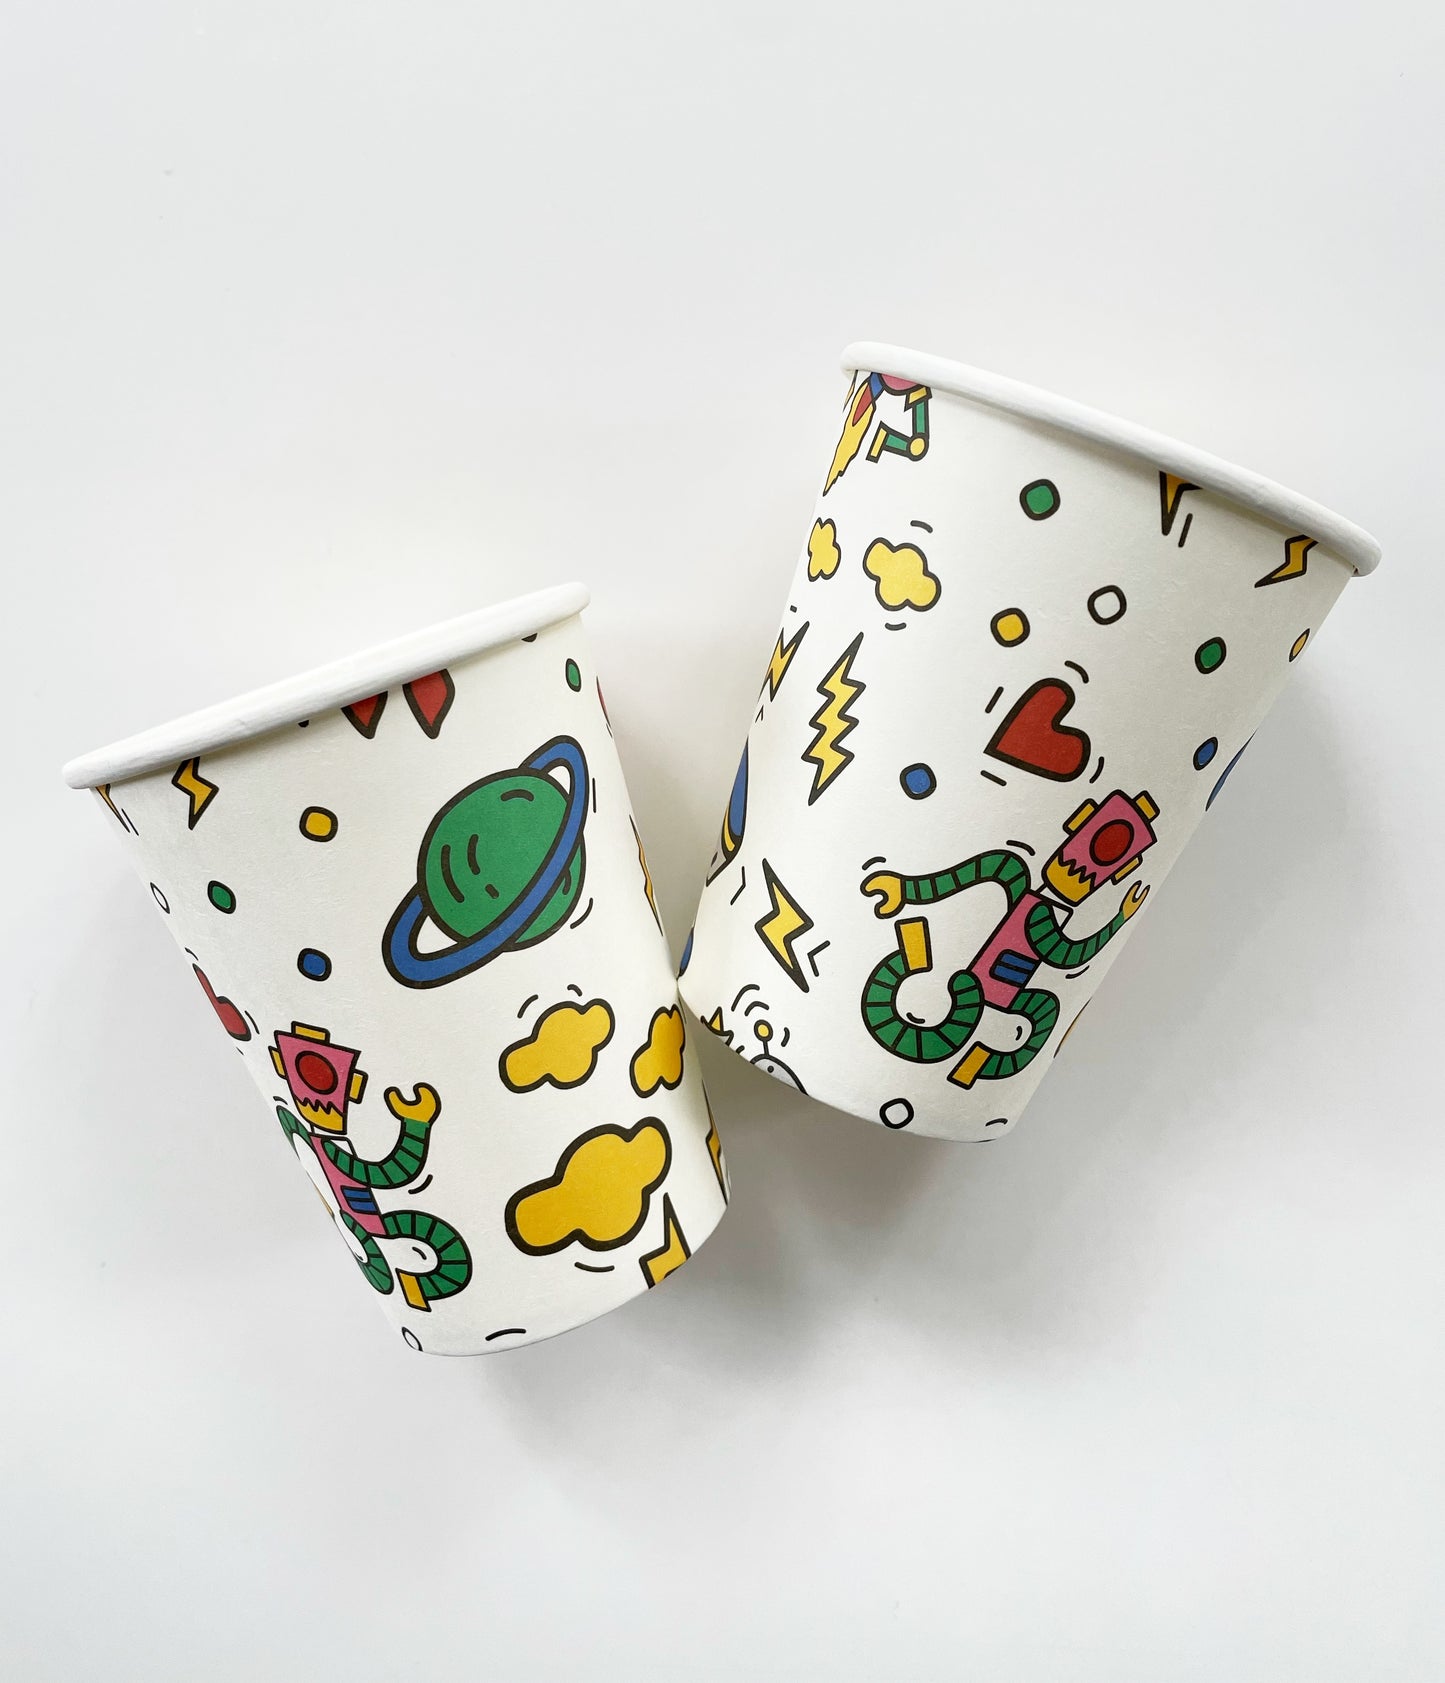 Paper party cups feature a fun and colourful pattern including planets, robots, spaceships and clouds in green, blue, red, yellow and pink colours.